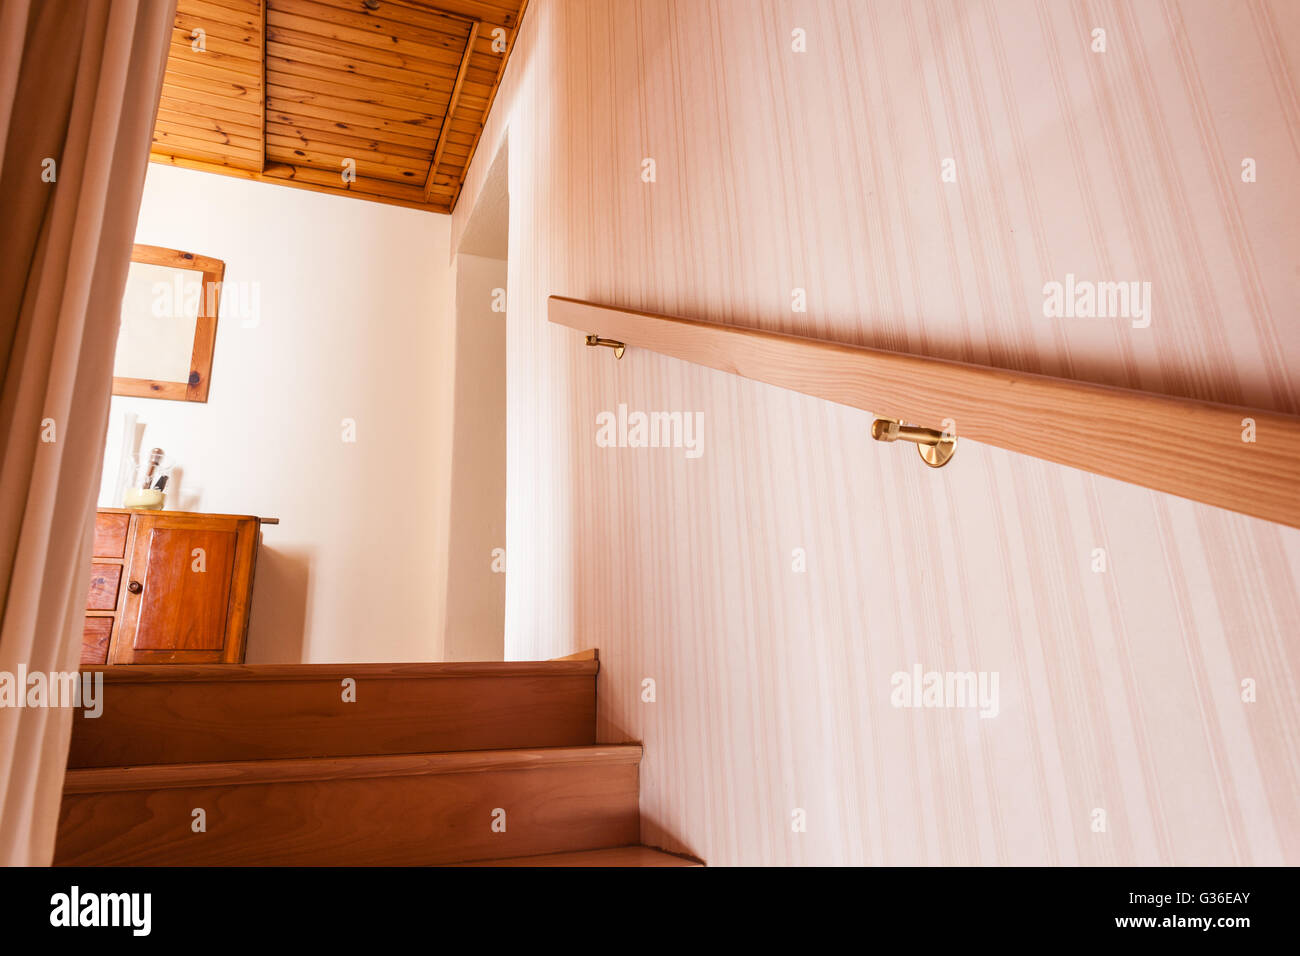 wooden interior staircase of a chalet or cottage in austria Stock Photo